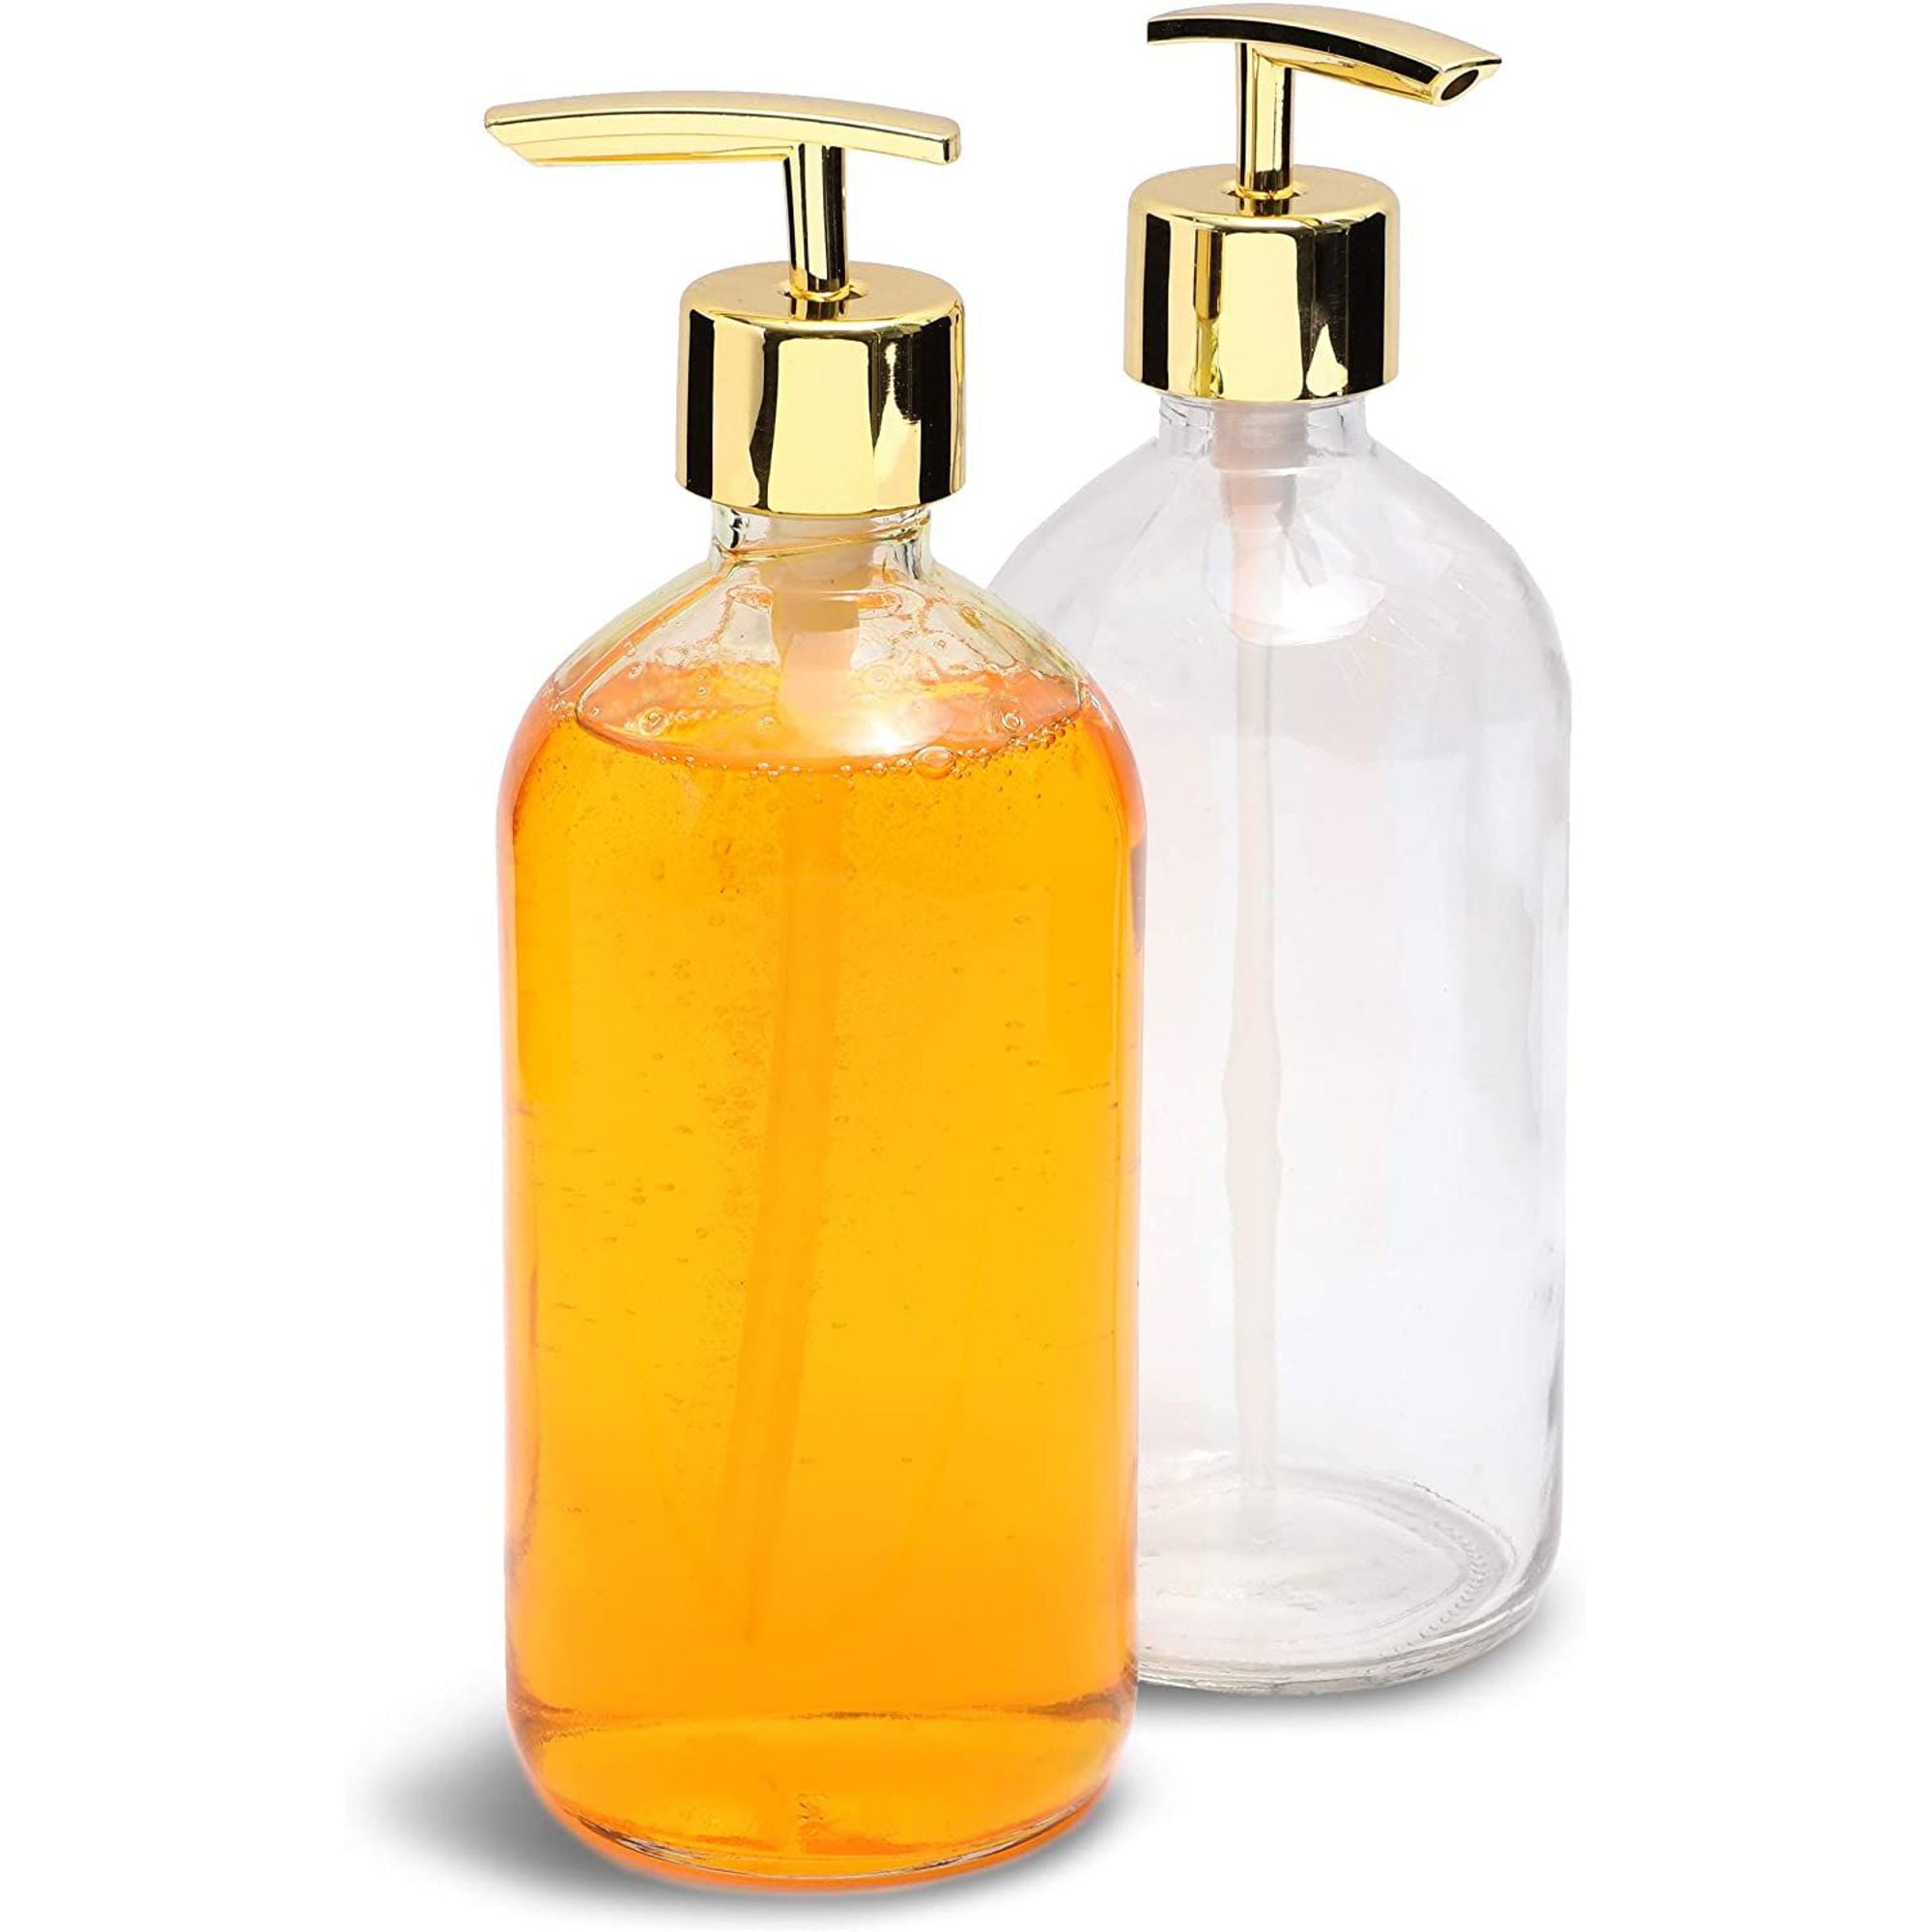 2 Pack Clear 16oz 500ml Glass Hand Soap Dispenser Bottle With Gold Pump For Kitchen Bathroom